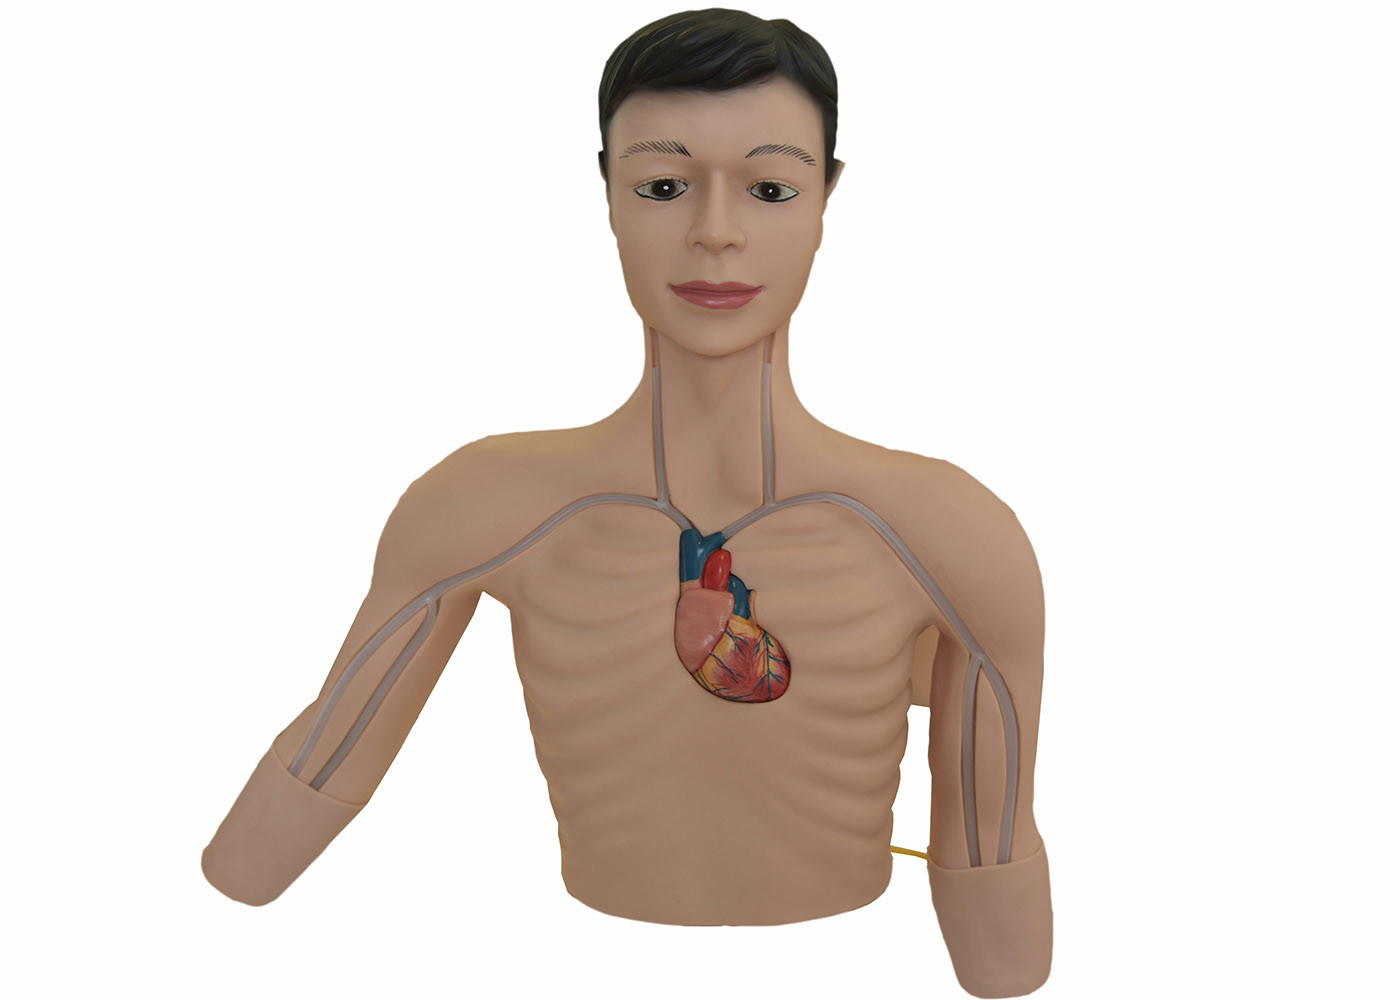 Male Adult Torso Clinical Simulation Center Peripheral Demonstration Manikin